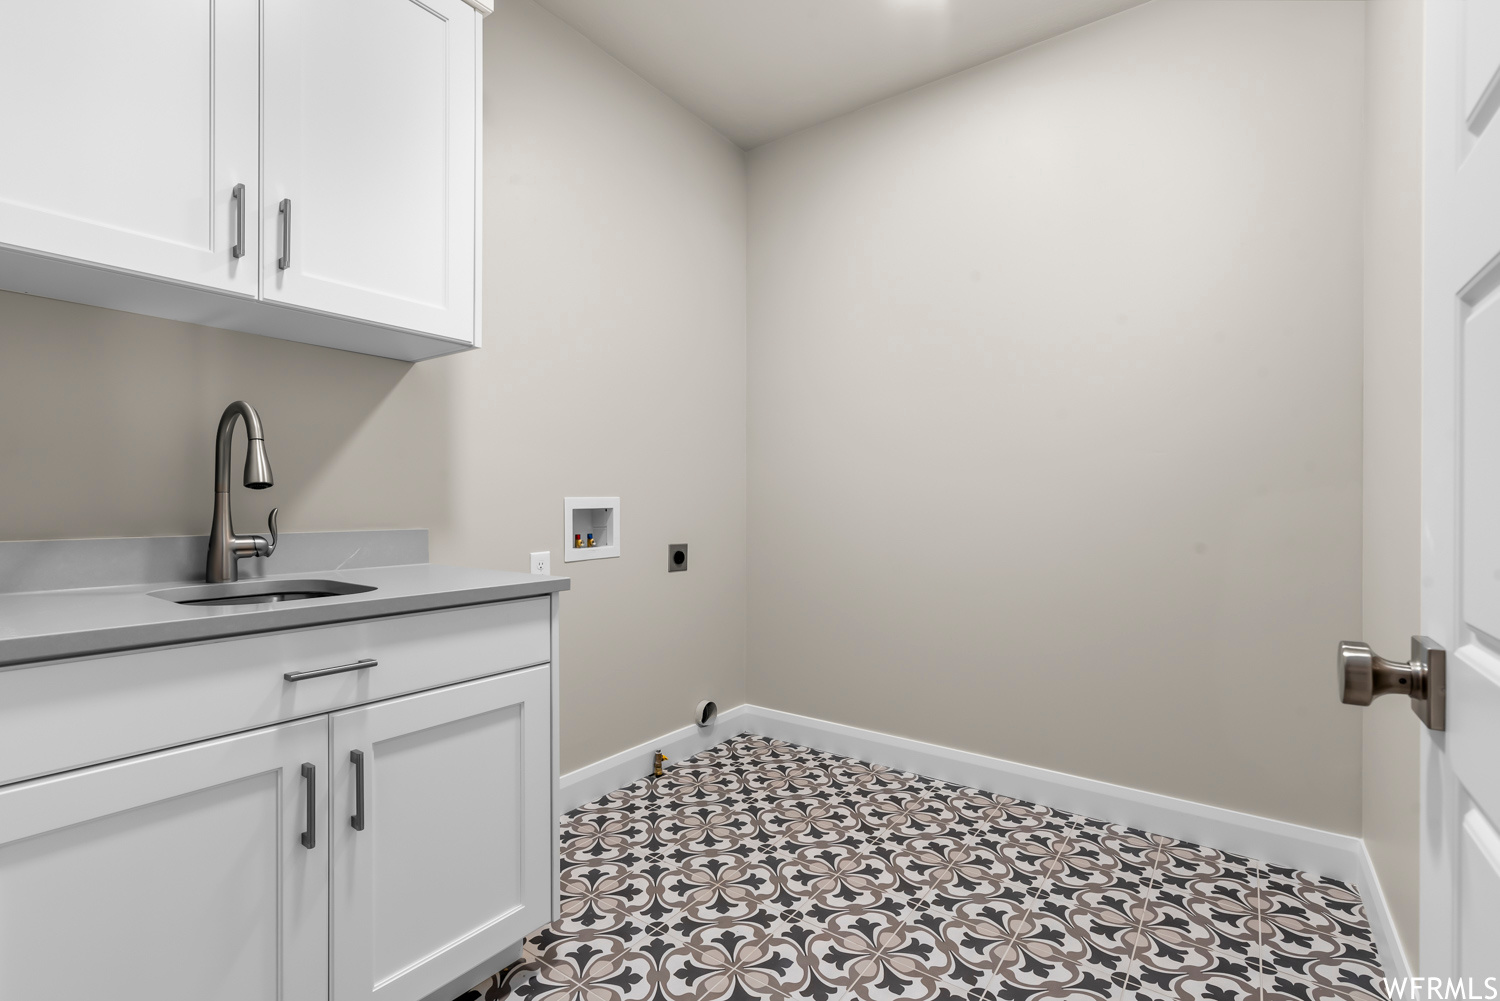 Washroom featuring cabinets, light tile flooring, sink, and hookup for a washing machine